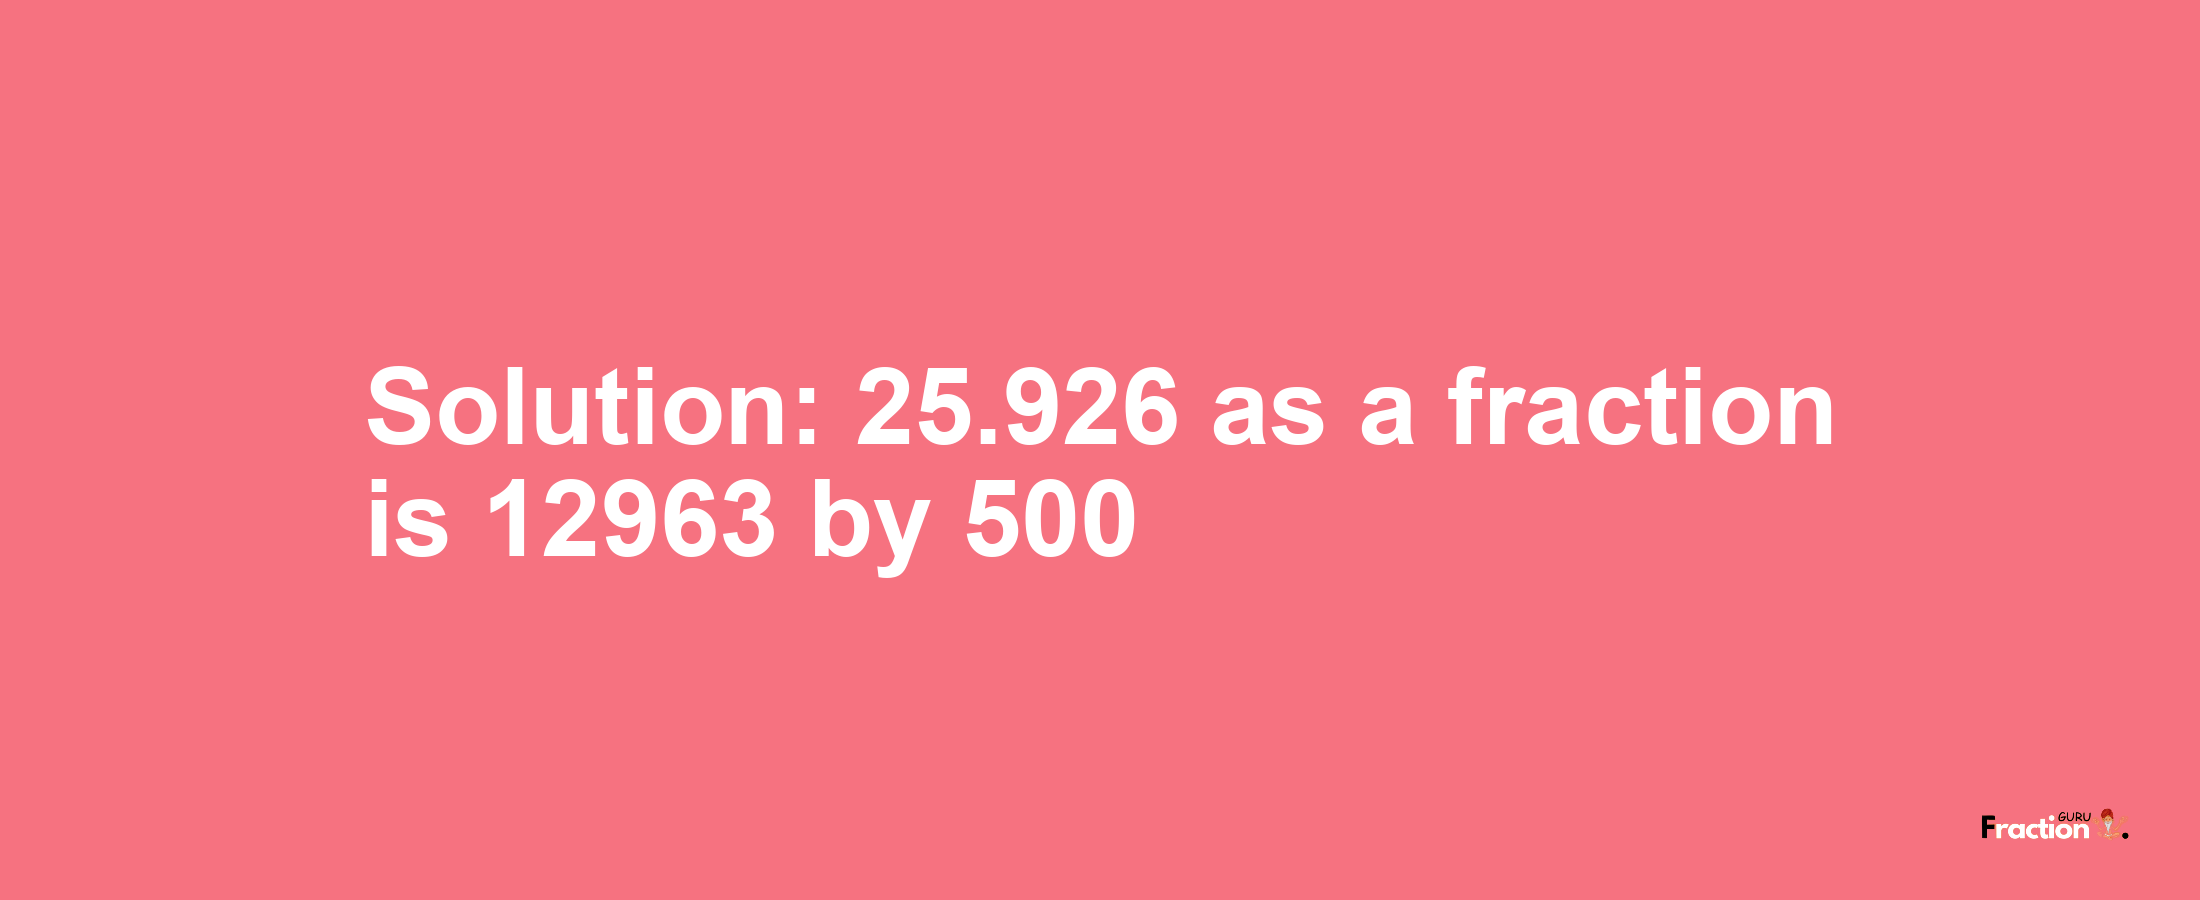 Solution:25.926 as a fraction is 12963/500